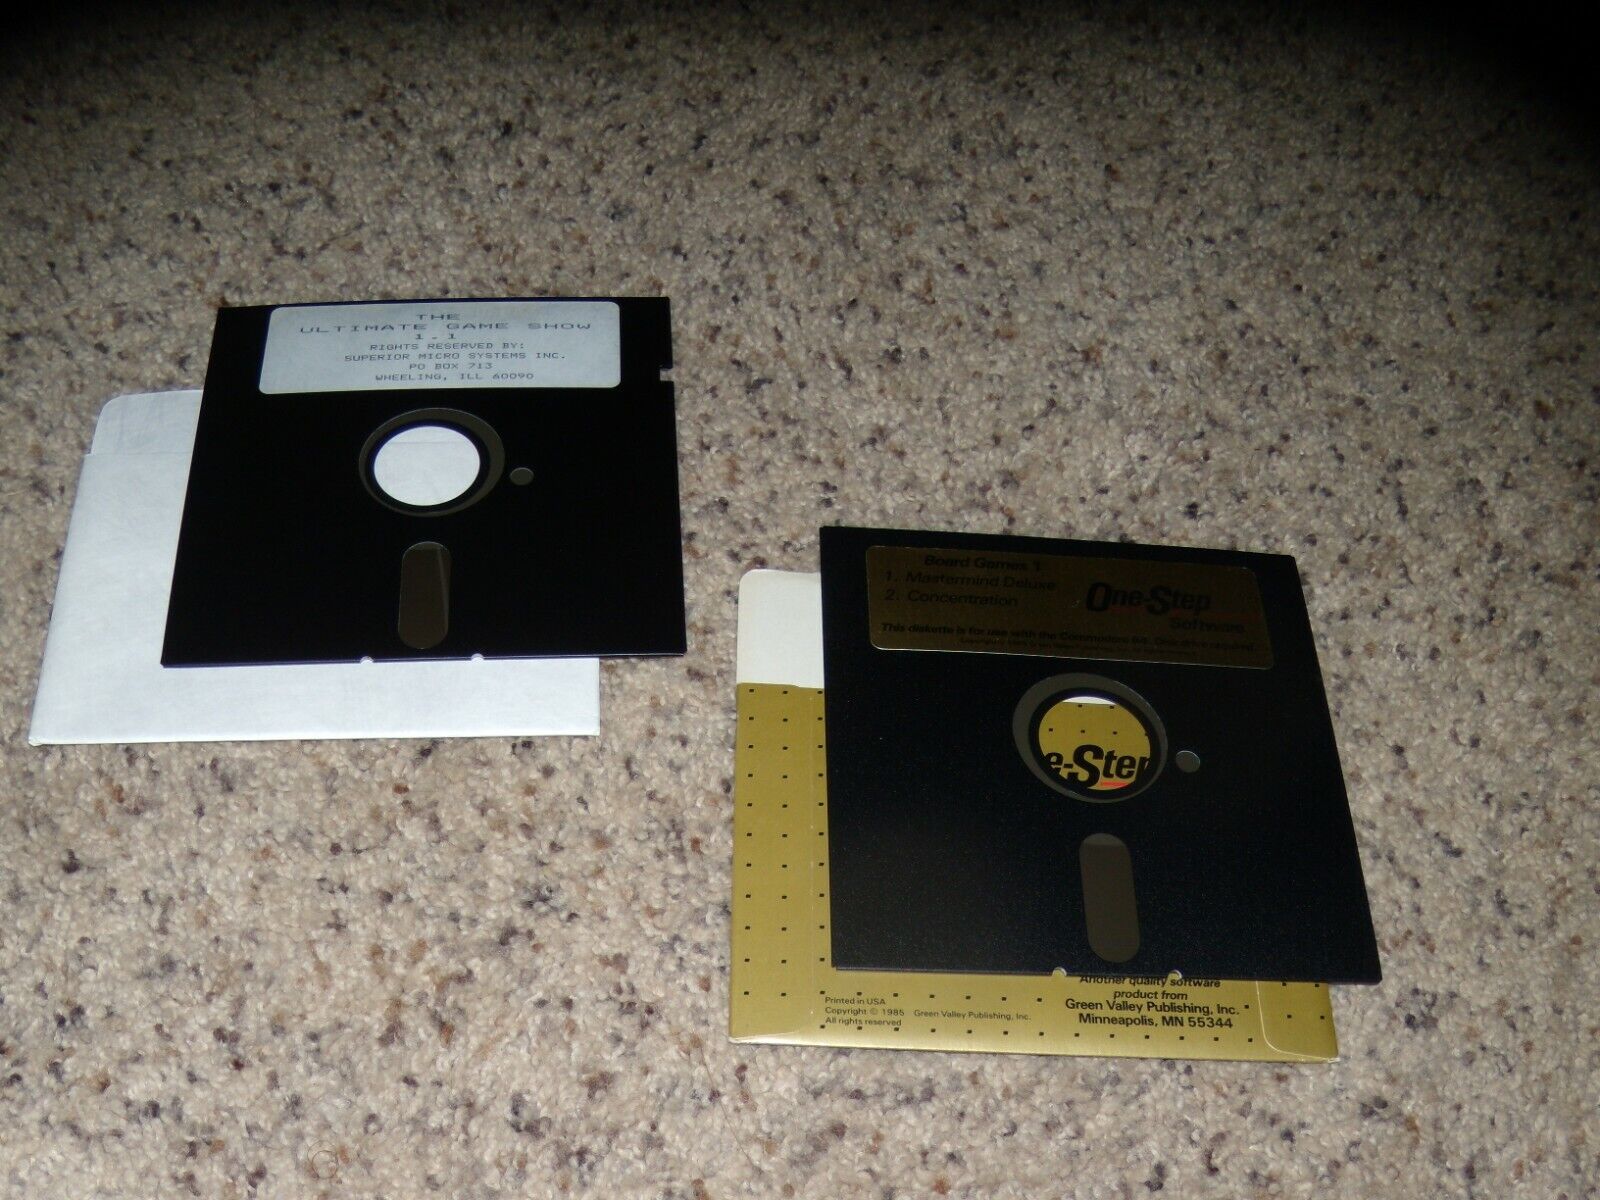 2 Commodore 64 Games: The Ultimate Game Show & Board Games 1- tested